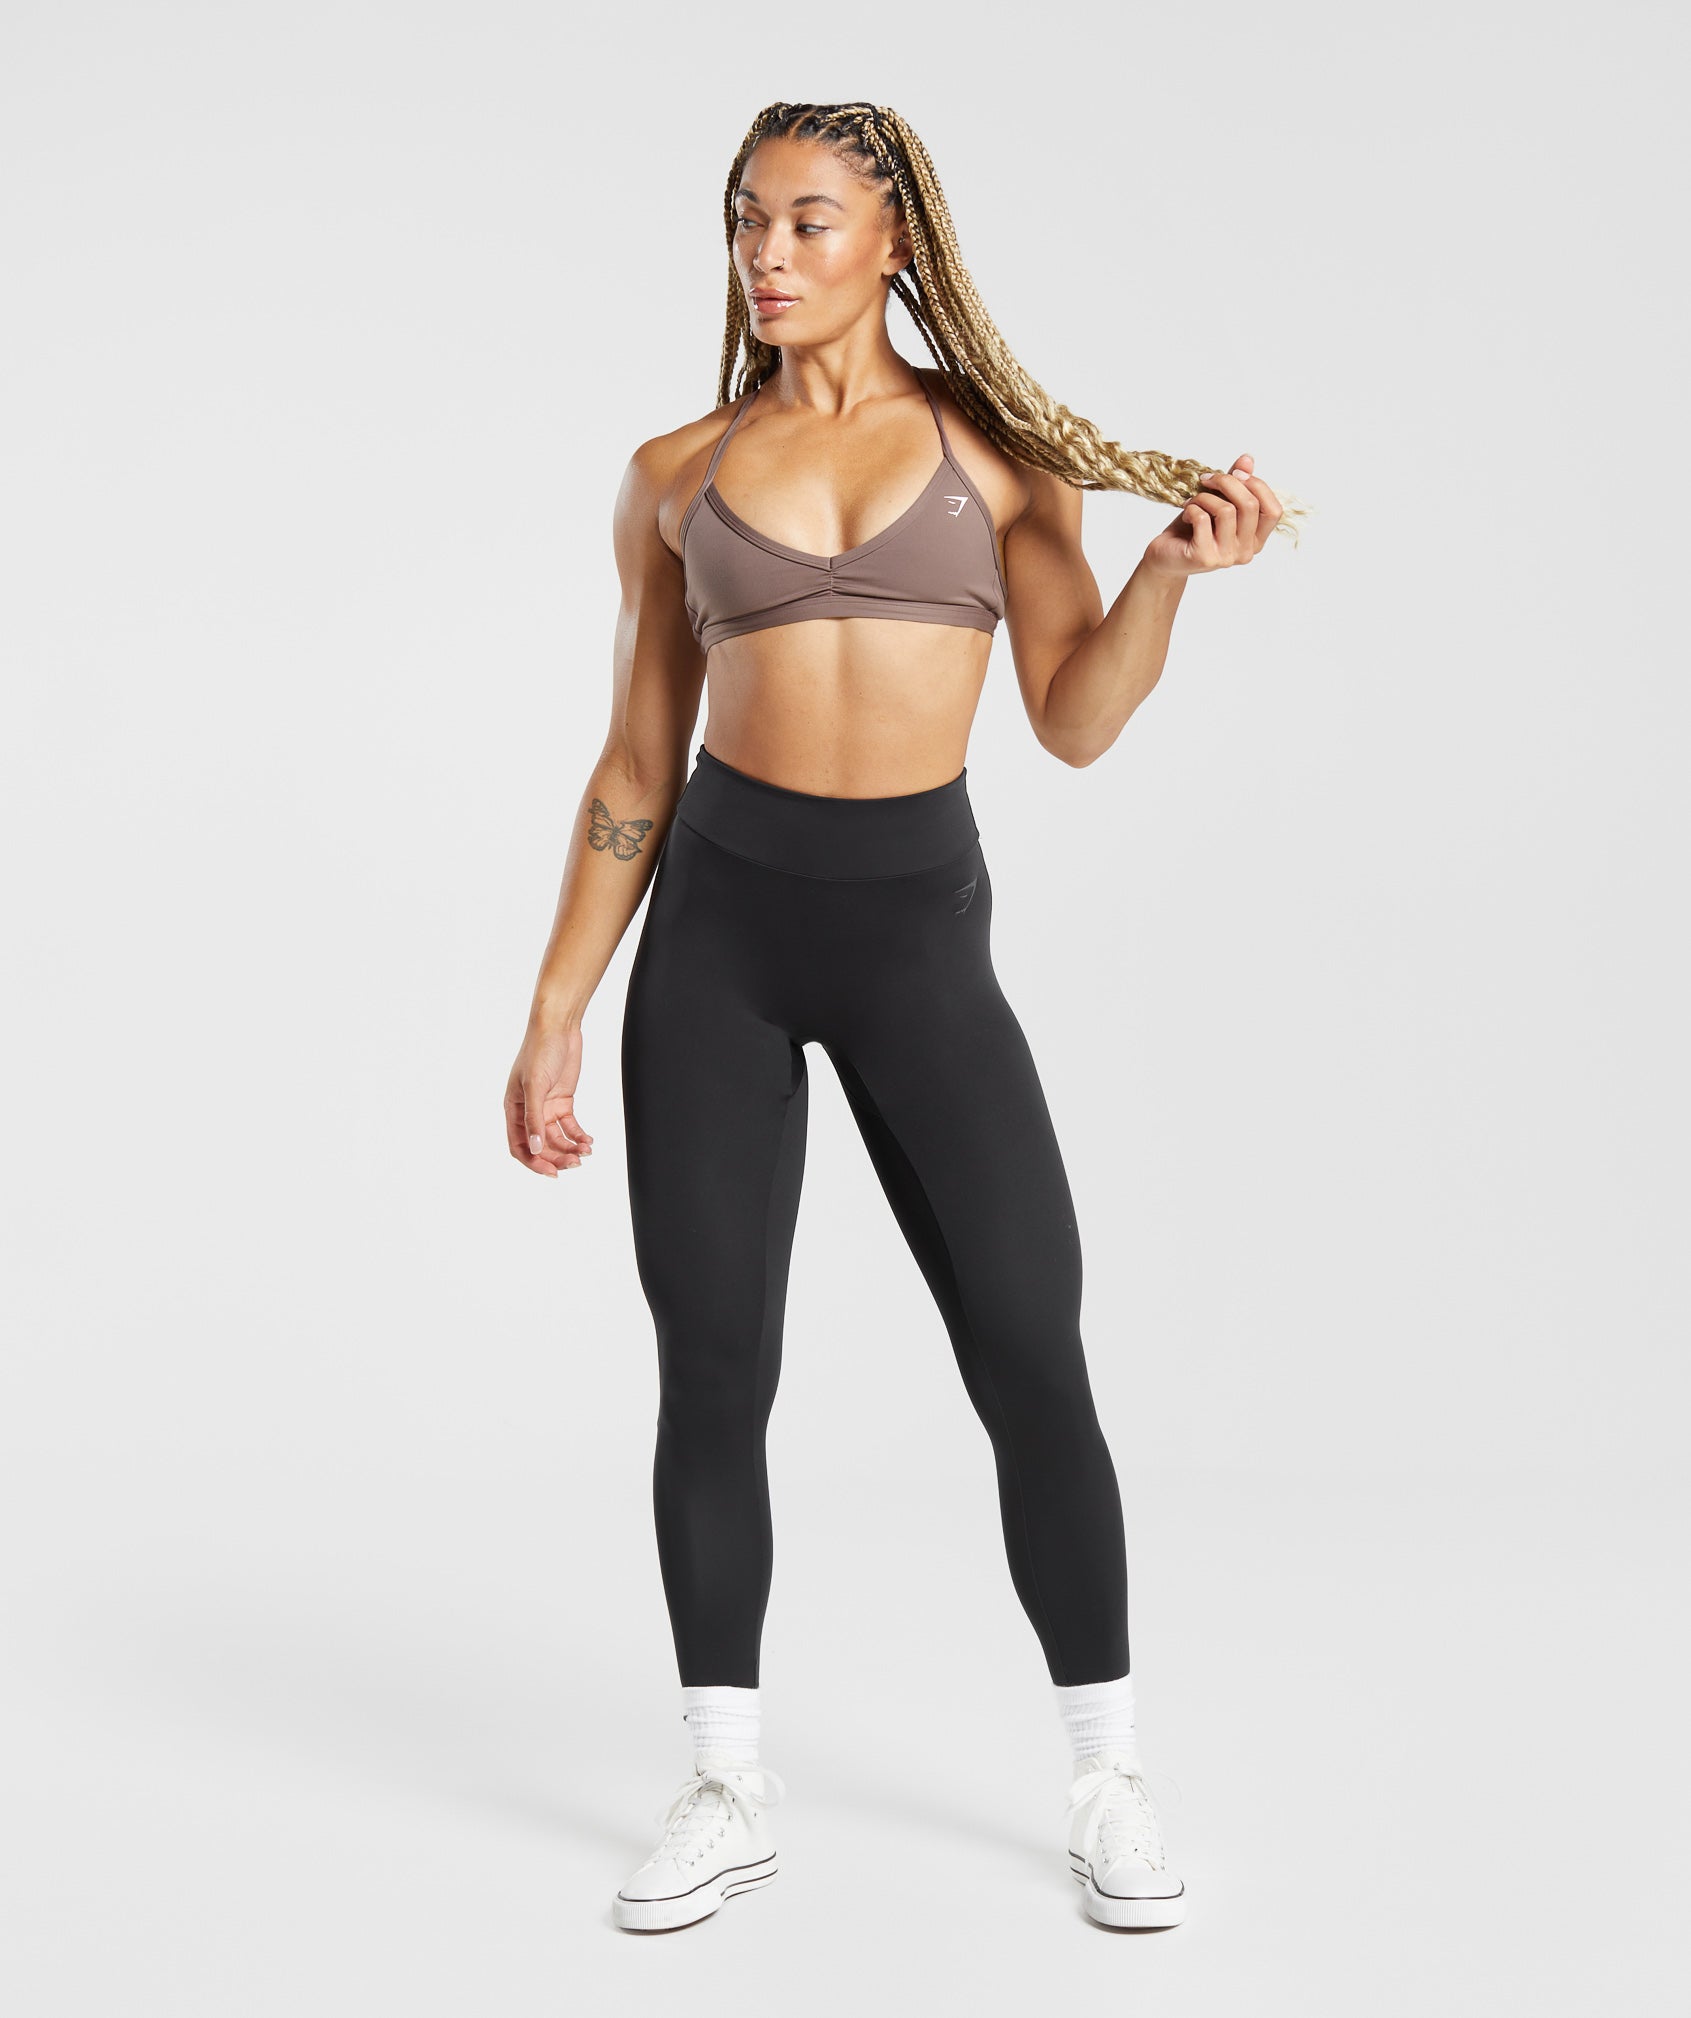 Relaxed Fit Leggings with Elasticated Waist